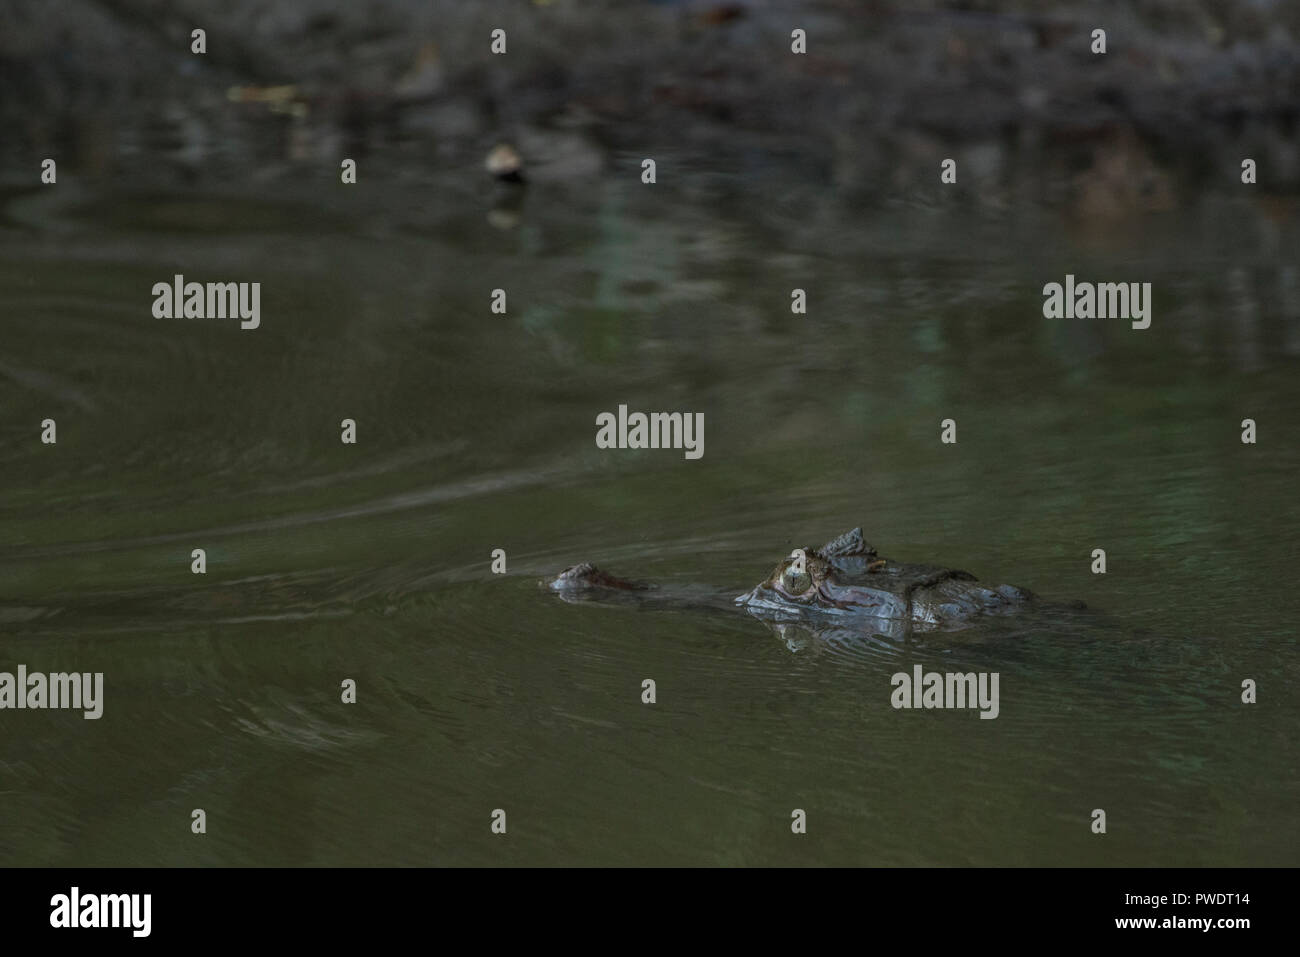 A spectacled caiman (Caiman crocodilus) surfaces for a breath of air before vanishing back underneath the muddy water in the Peruvian jungle. Stock Photo